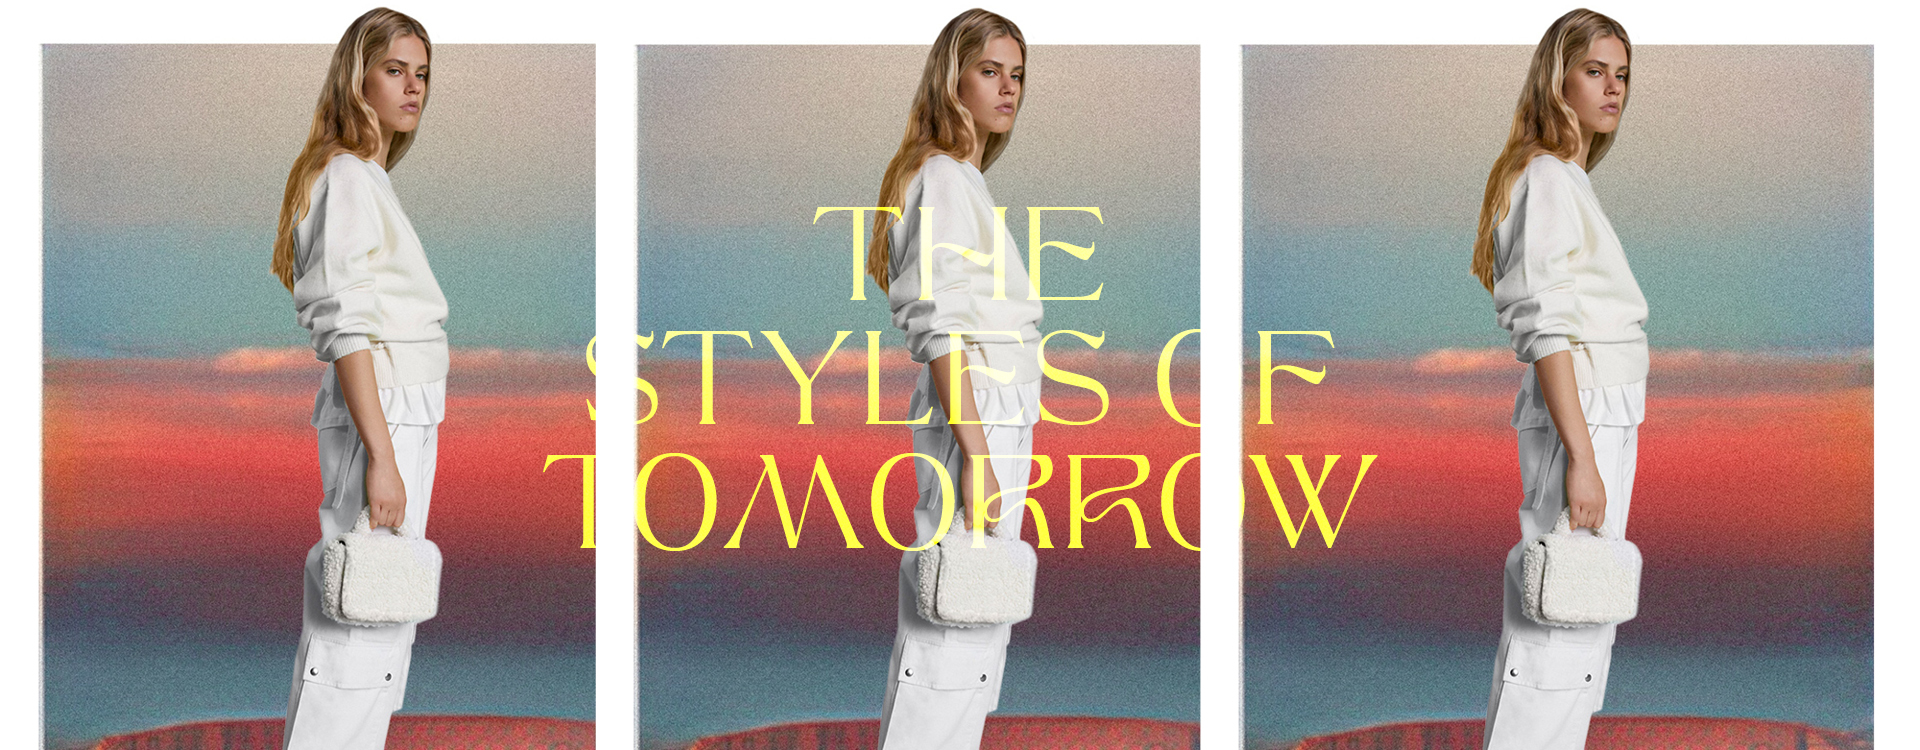 The Styles of tomorrow